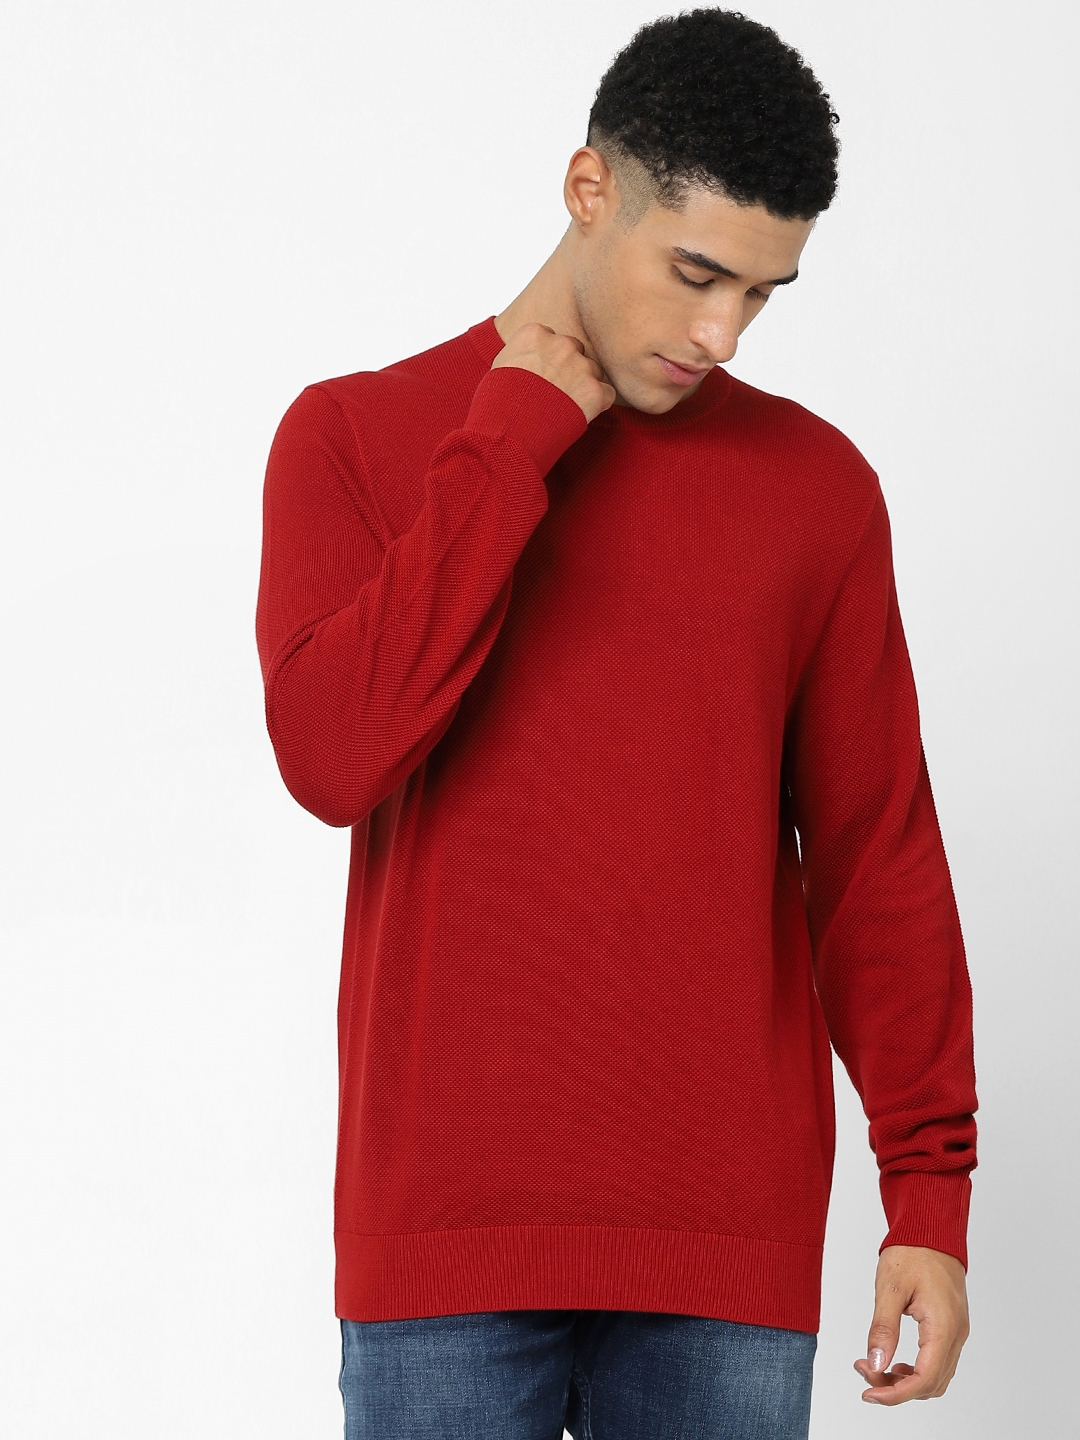 Men's Red  Sweaters